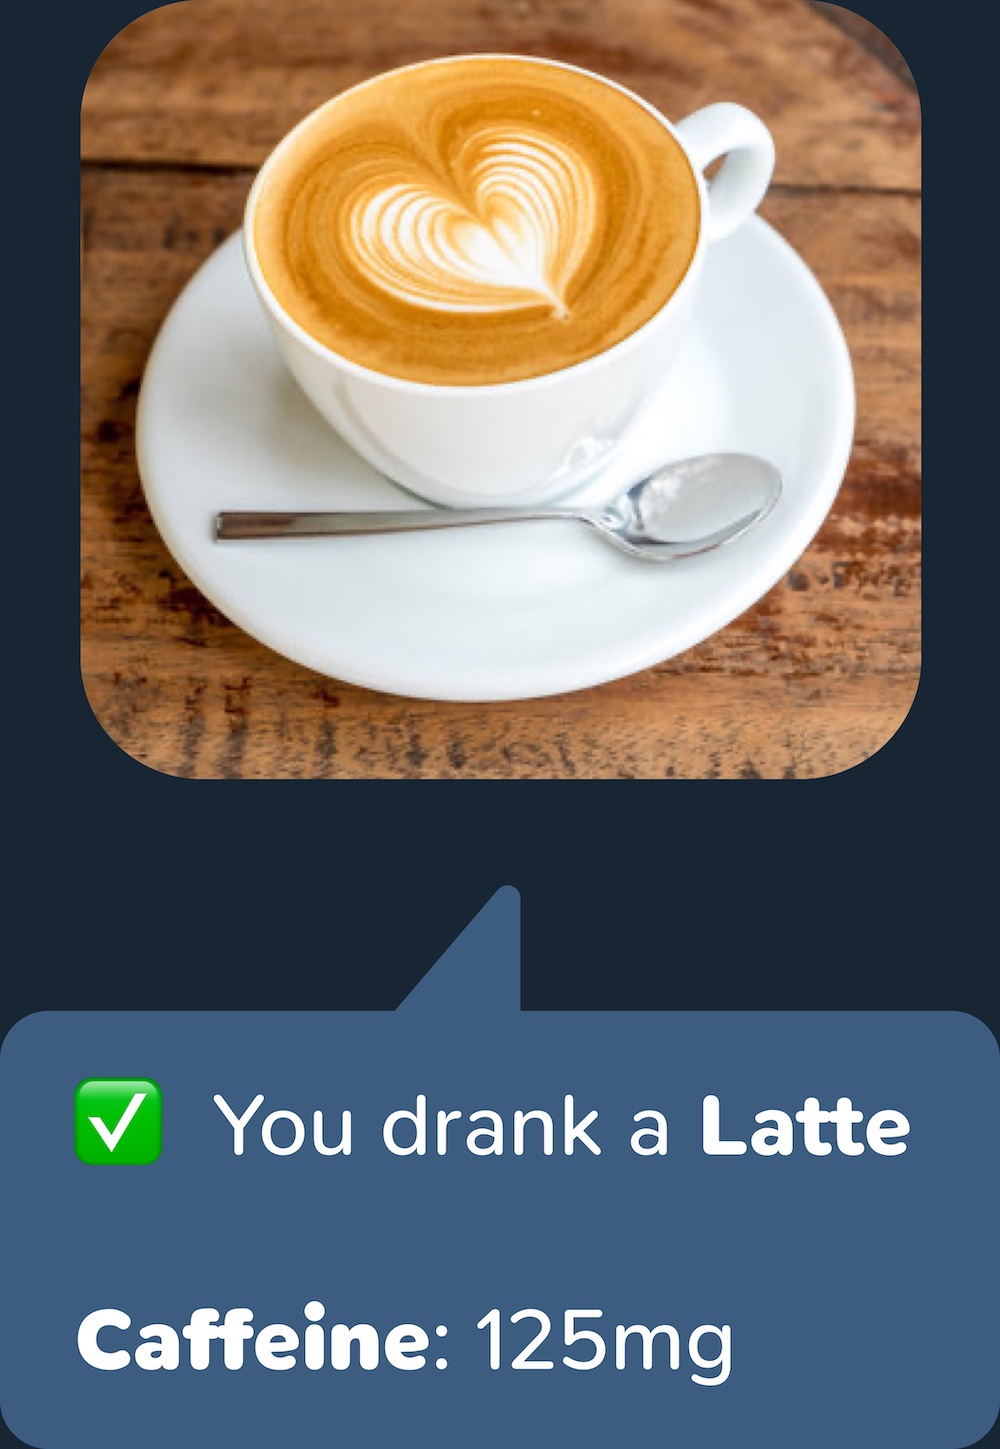 Sending a pic of a latte to the chat bot and getting back the caffeine amount, calories and macros.